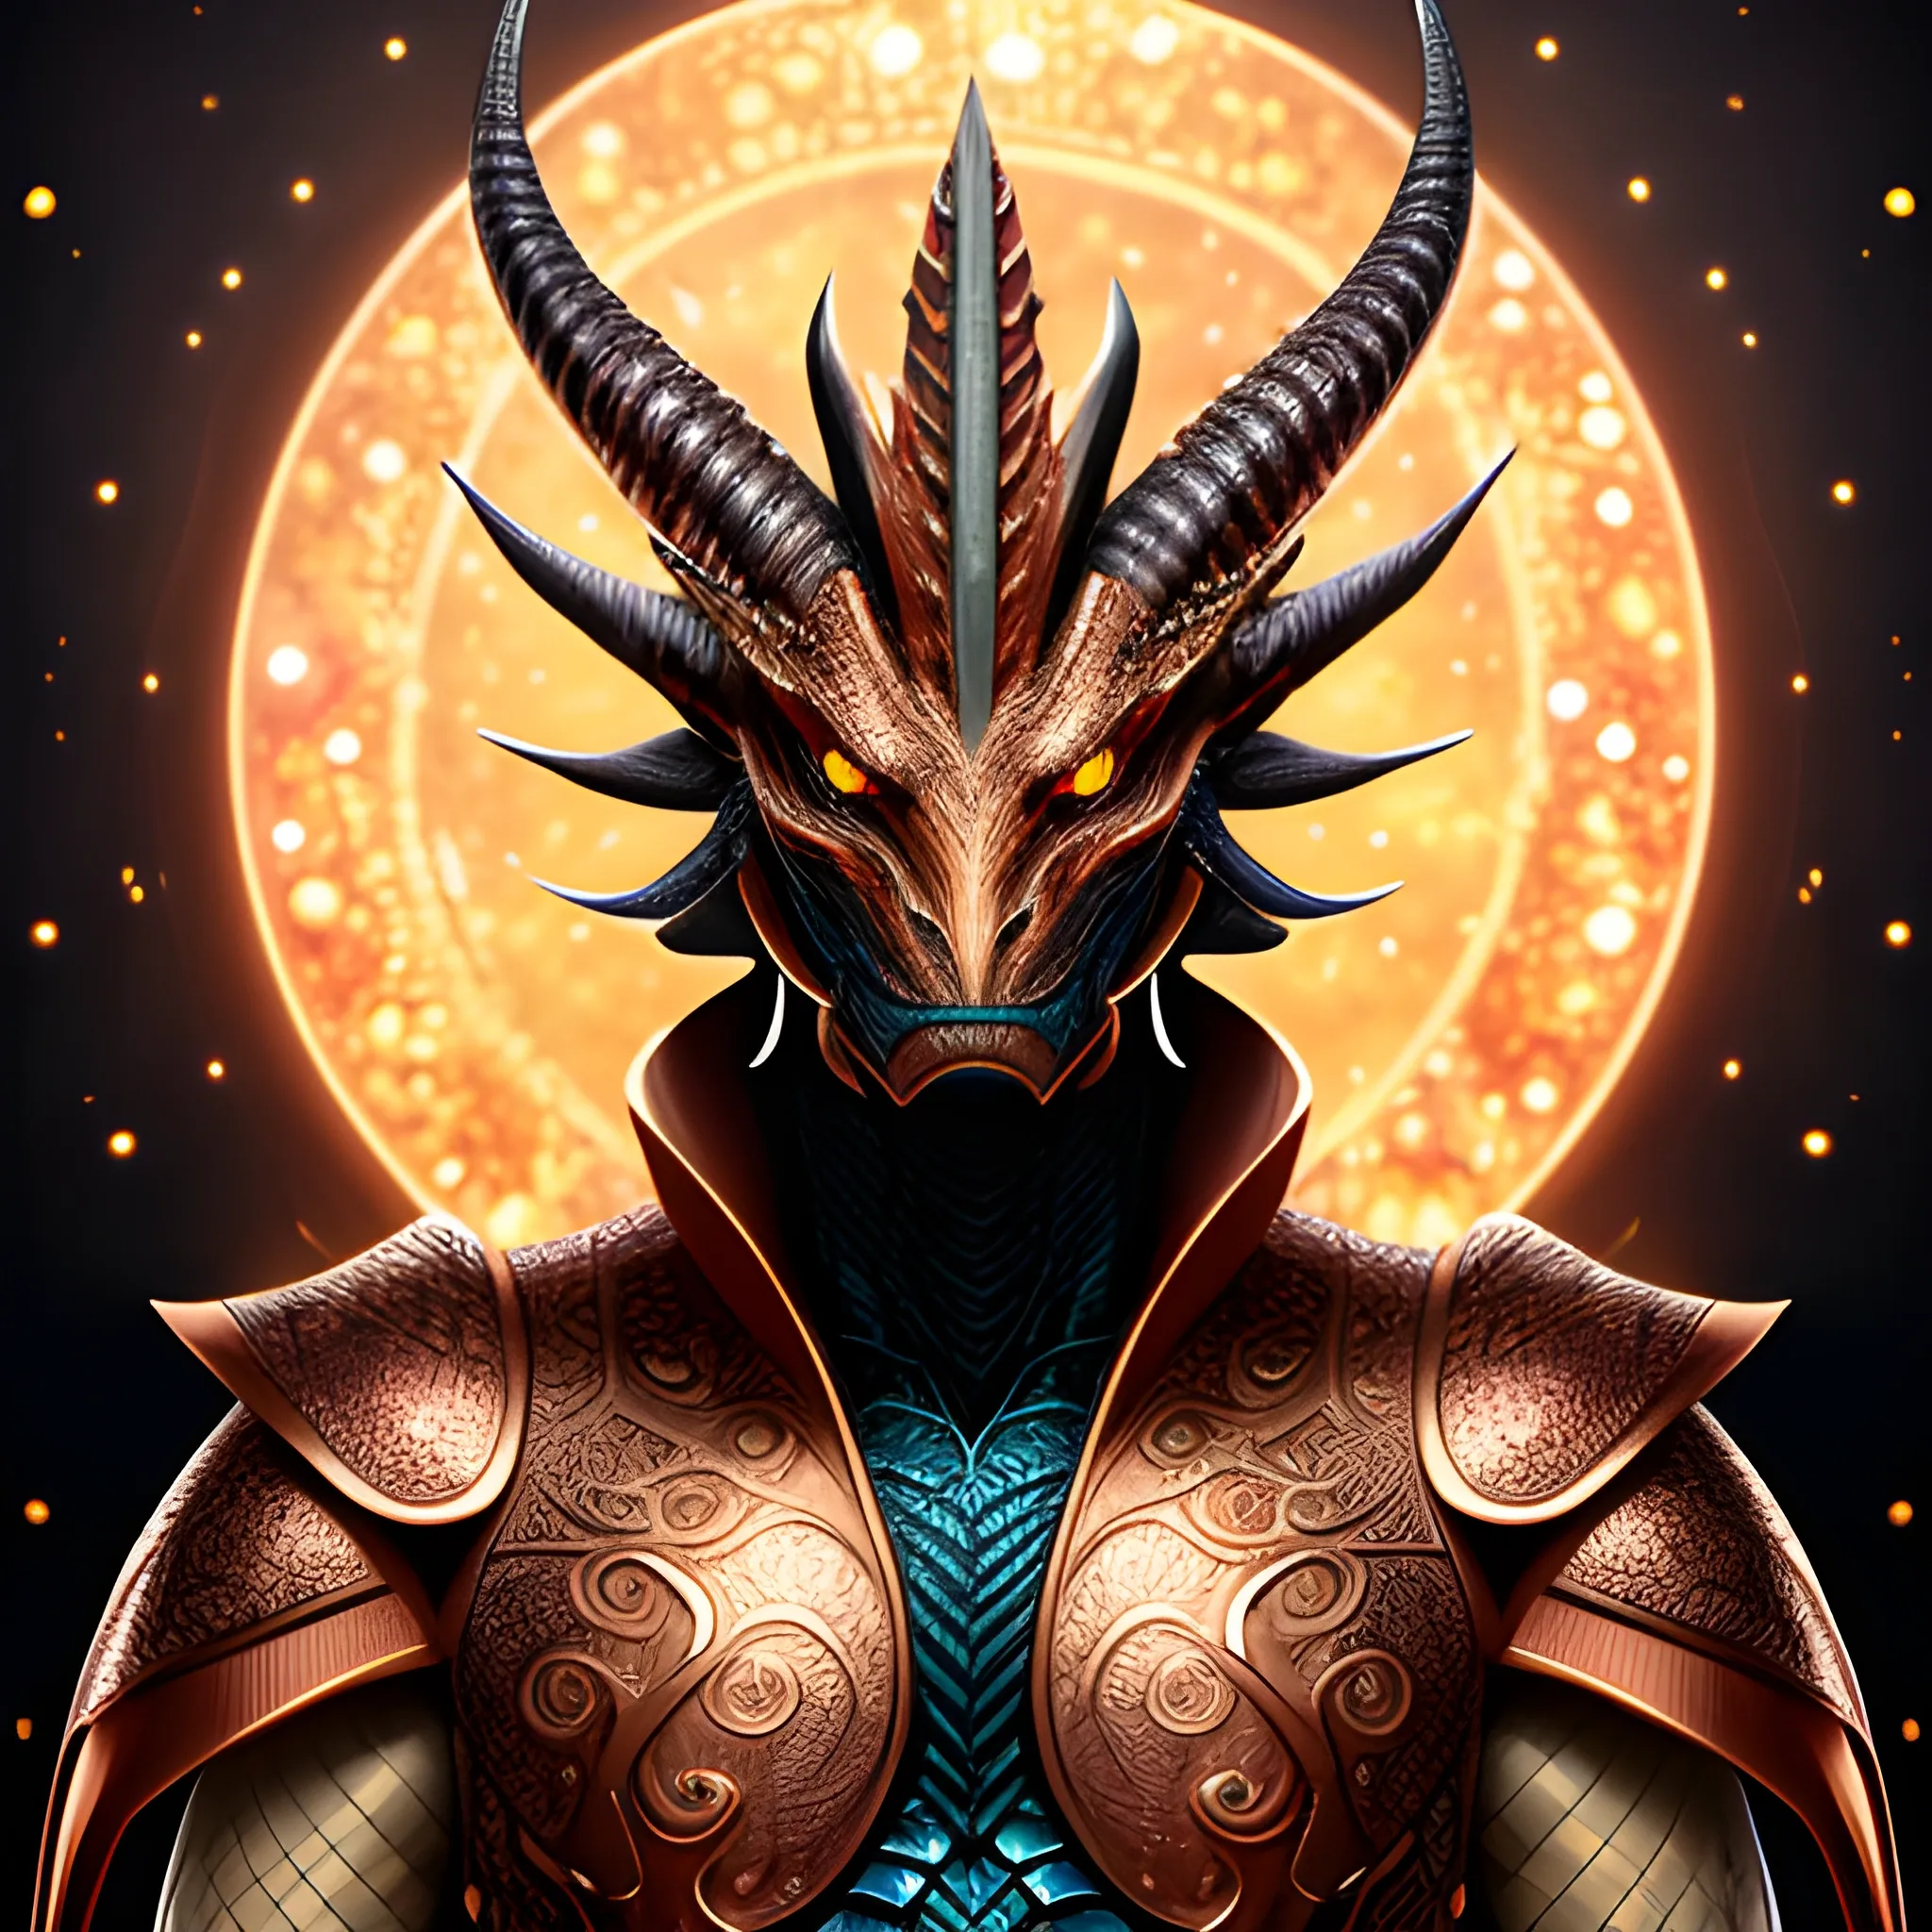 Small dragon humanoid looking at the camera. He has copper scales, and is wearing a robe made of stars. Fantasy.